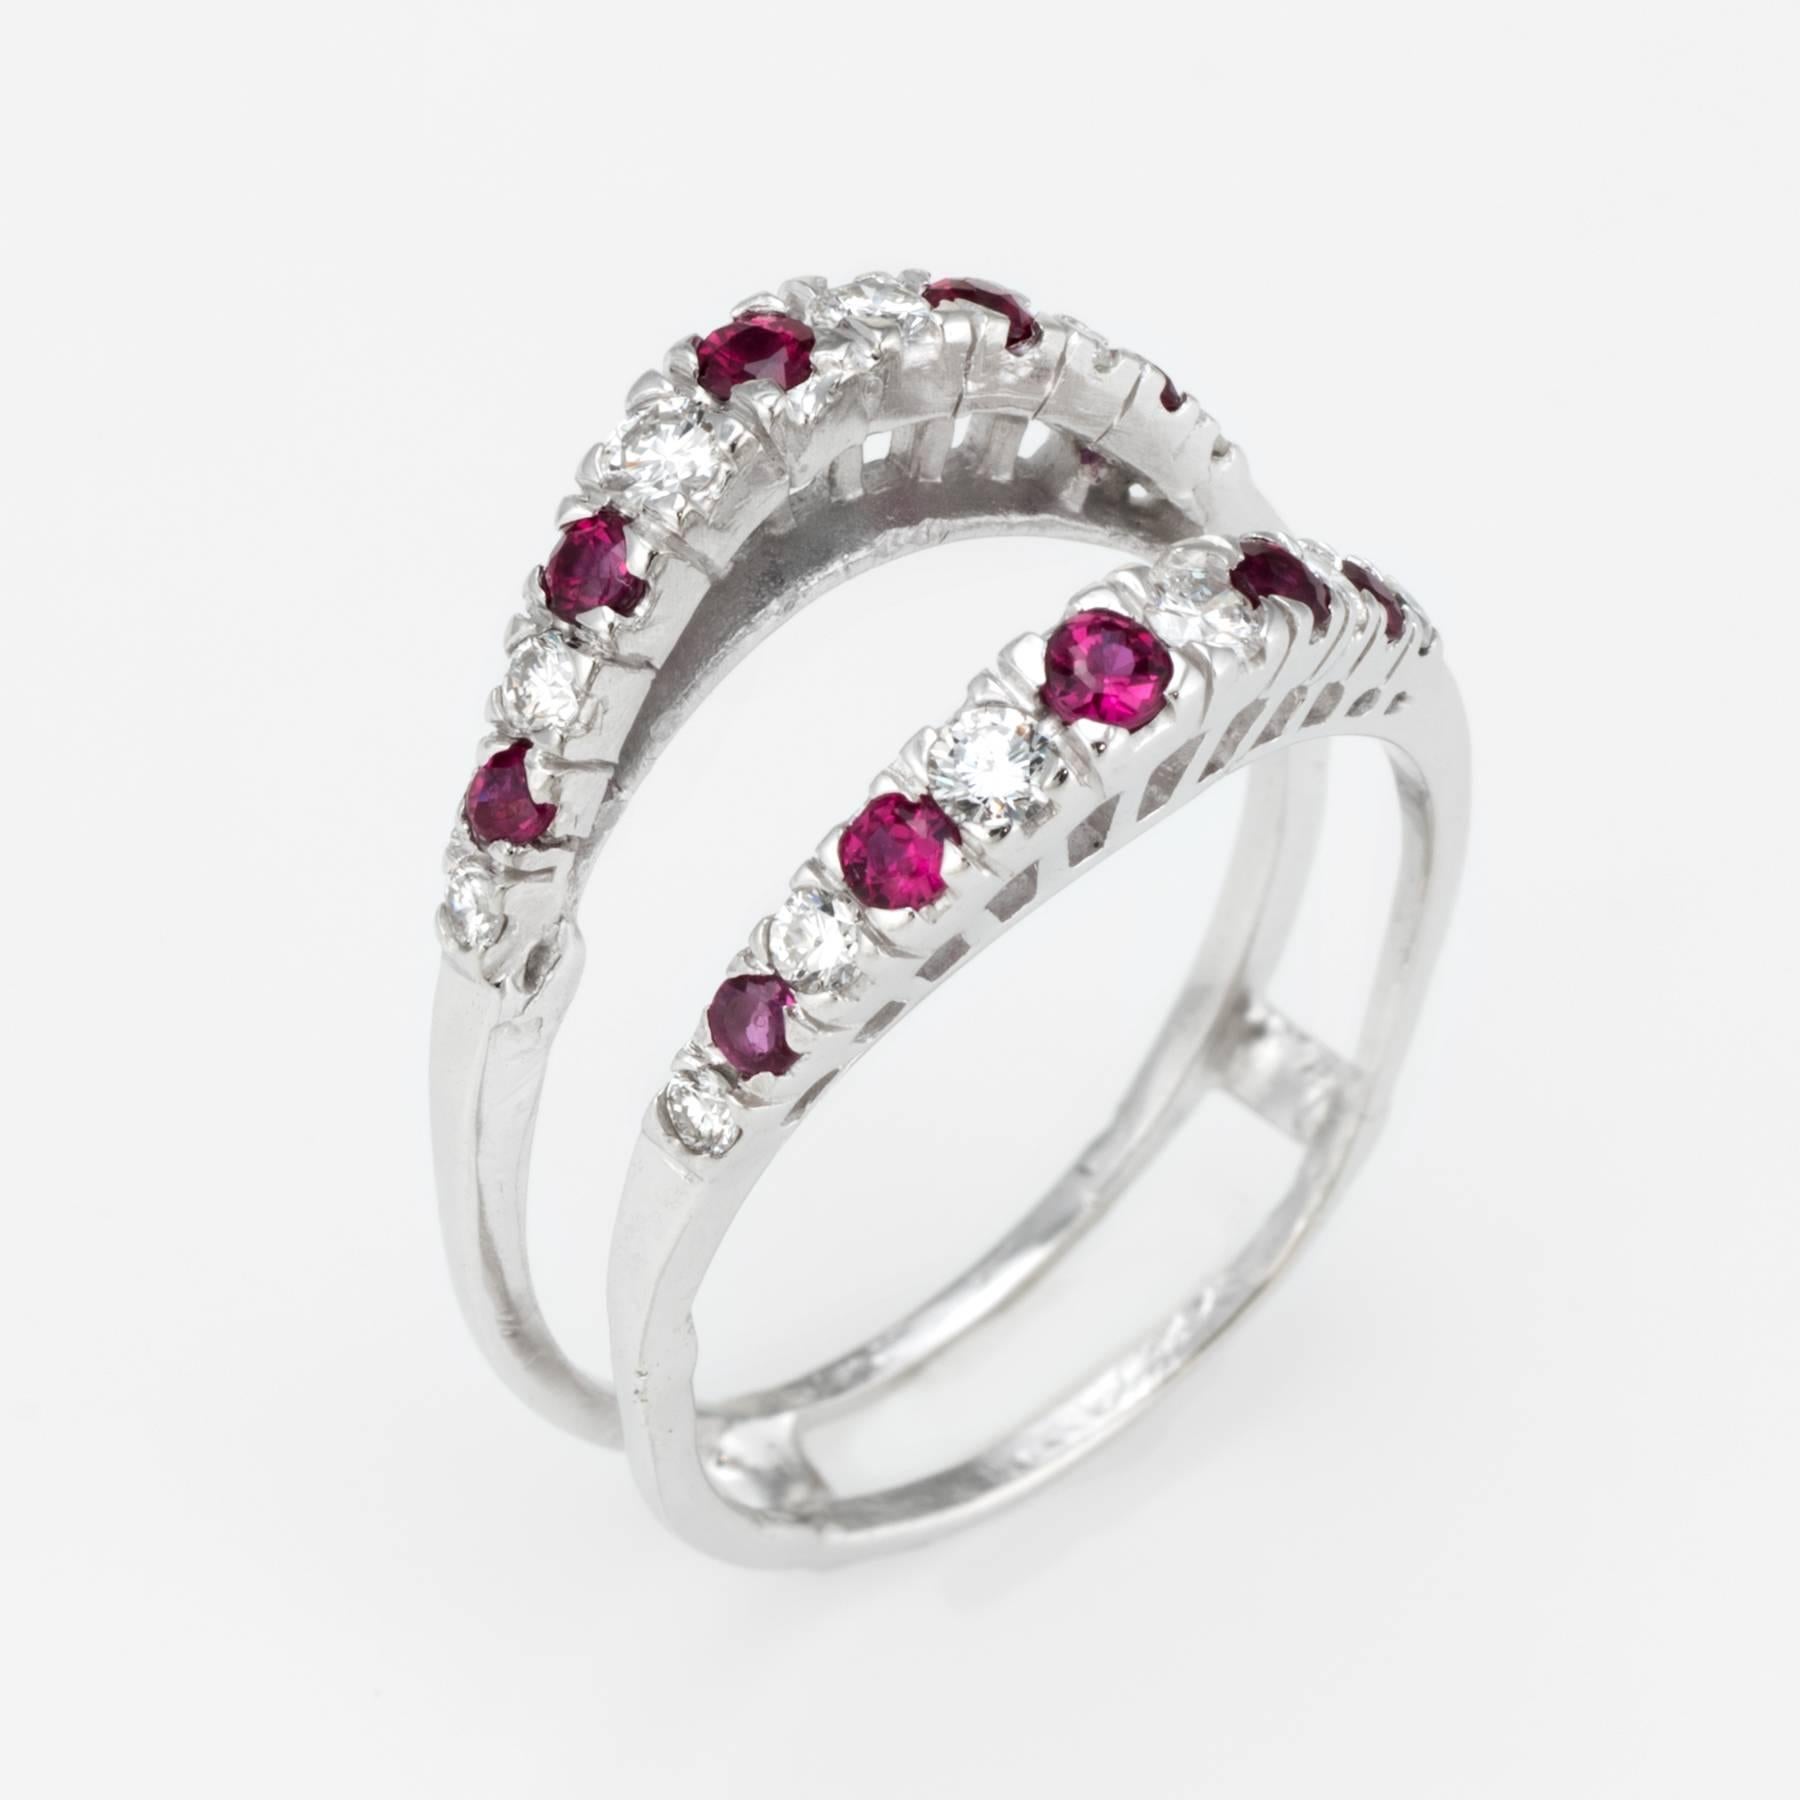 Elegant vintage wedding ring guard (circa 1950s to 1960s), crafted in 14 karat white gold. 

Round brilliant cut diamonds total an estimated 0.40 carats (estimated at H-I color and VS2-SI clarity), accented with an estimated 0.40 carats of rubies.  